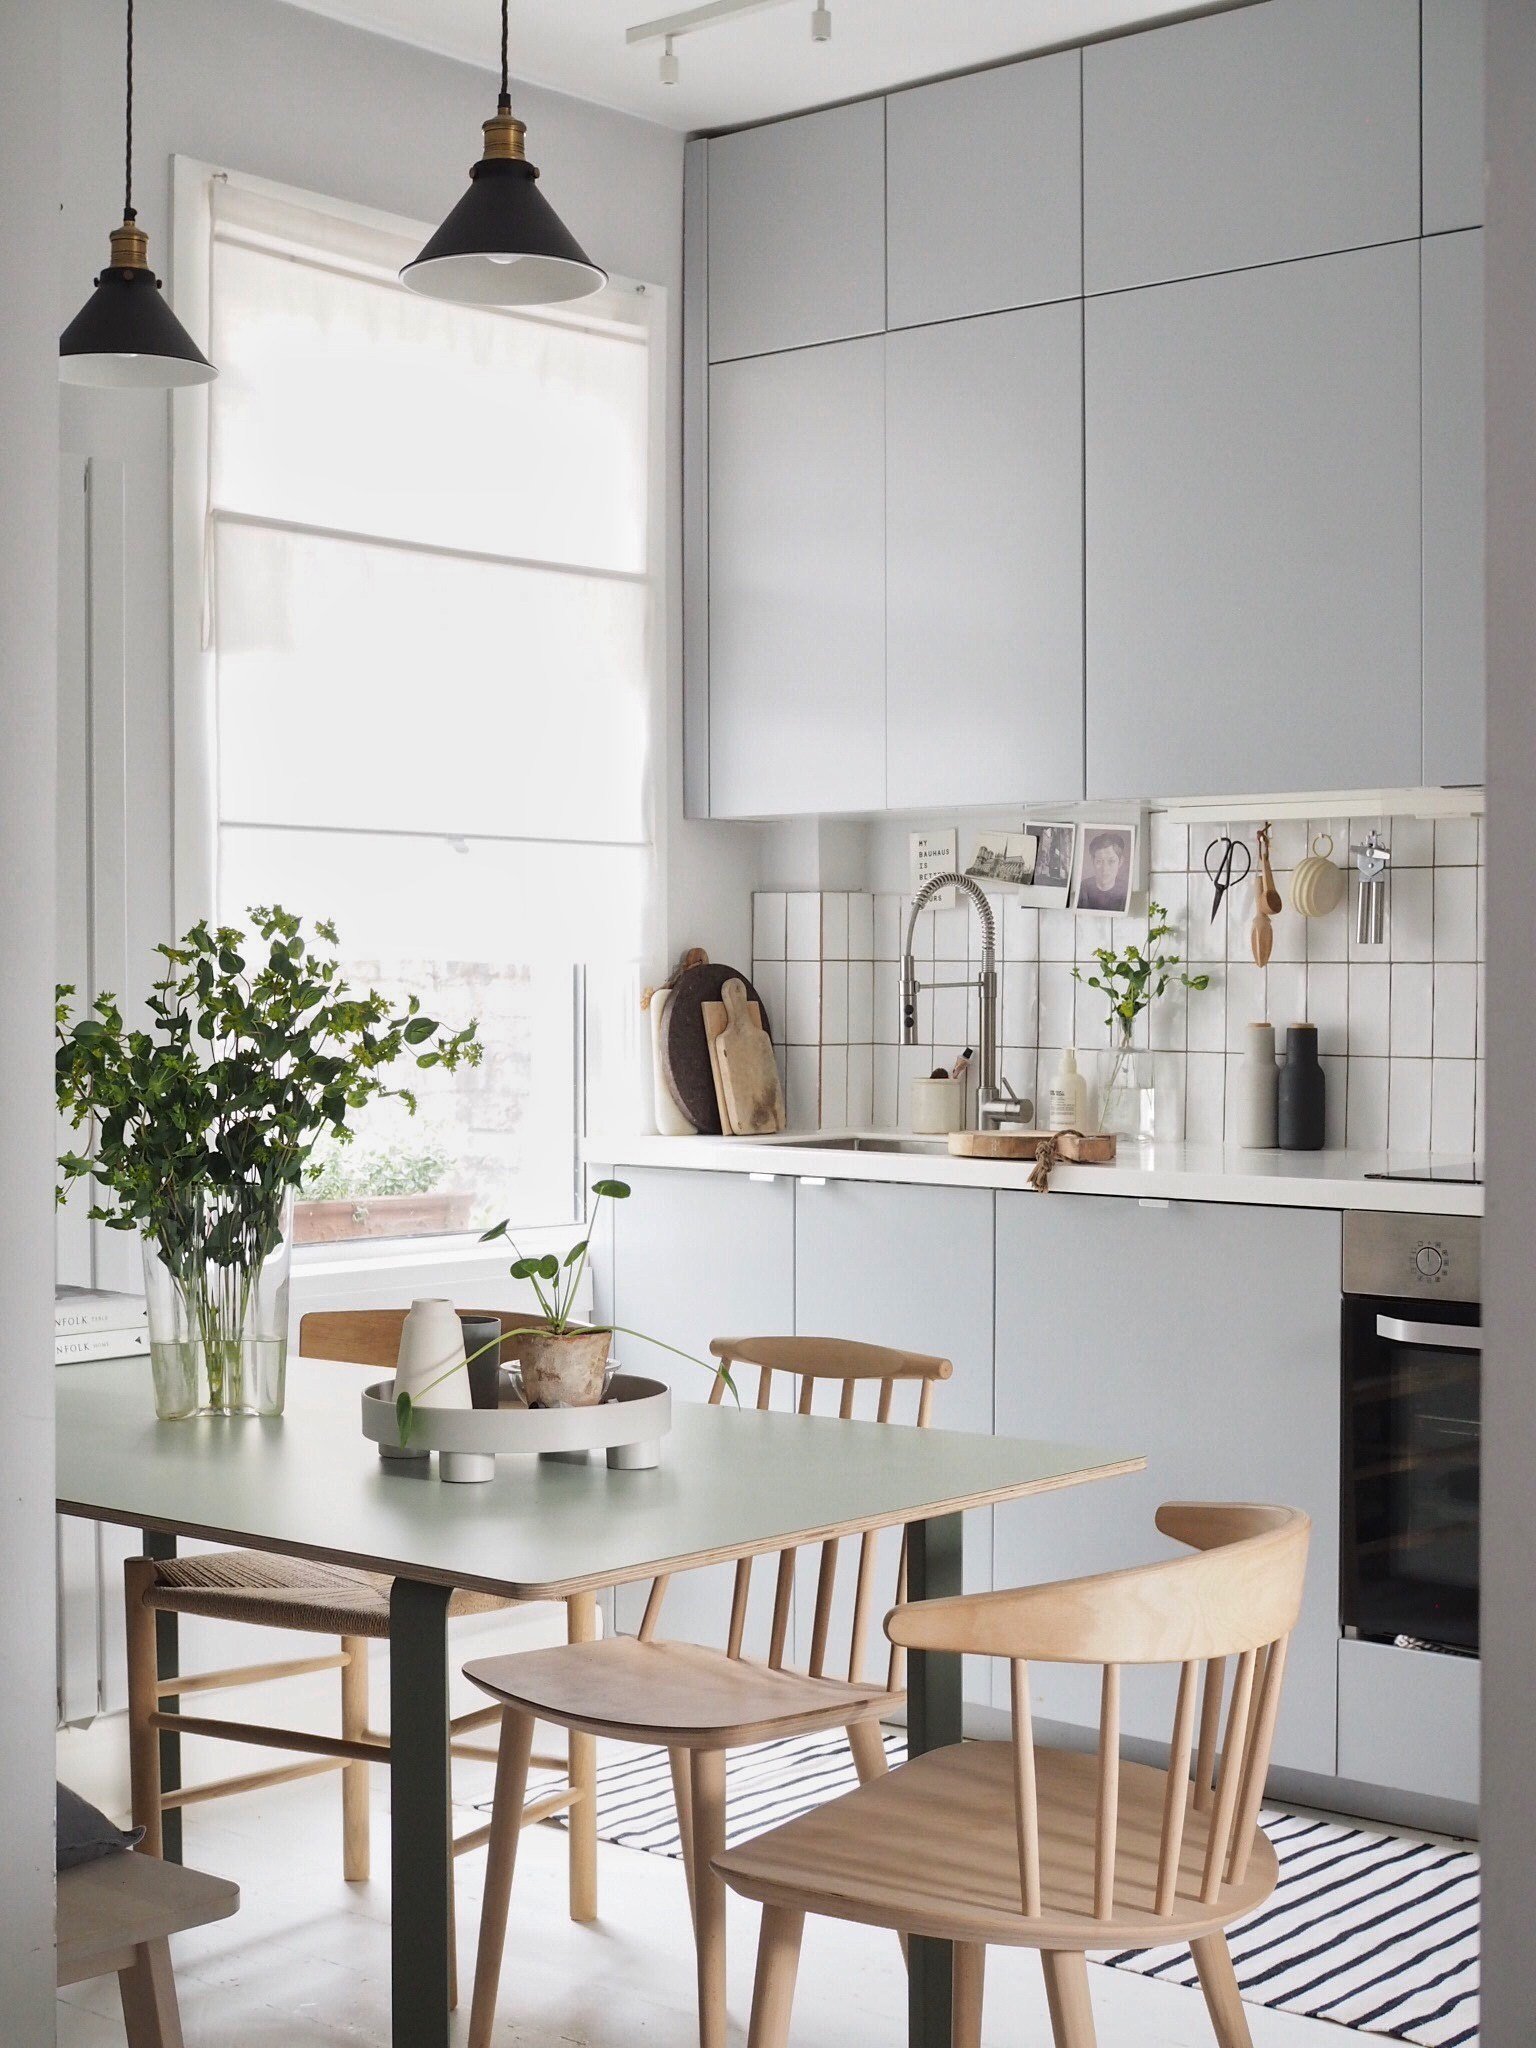 Ikea Kitchen Hacks 12 Ways To Make Your Affordable Kitchen Look Luxe